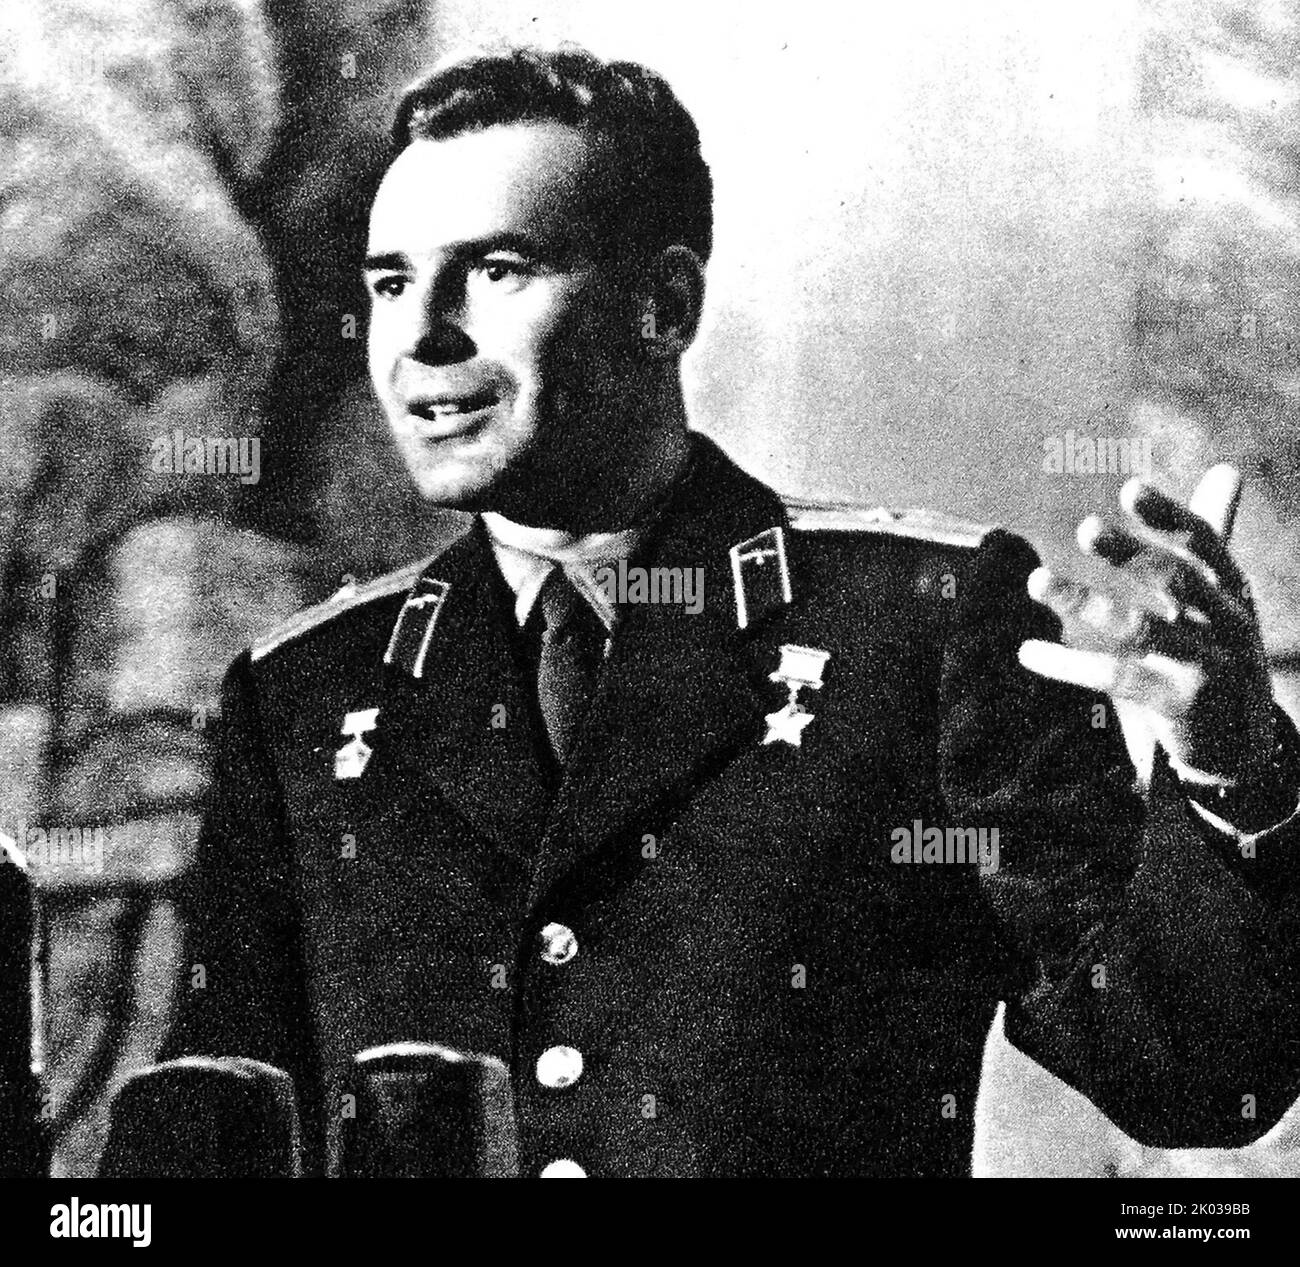 Gherman Stepanovich Titov (1935 - 2000) Soviet cosmonaut who, on 6 August 1961 became the second human to orbit the Earth, aboard Vostok 2, preceded by Yuri Gagarin on Vostok 1. Stock Photo